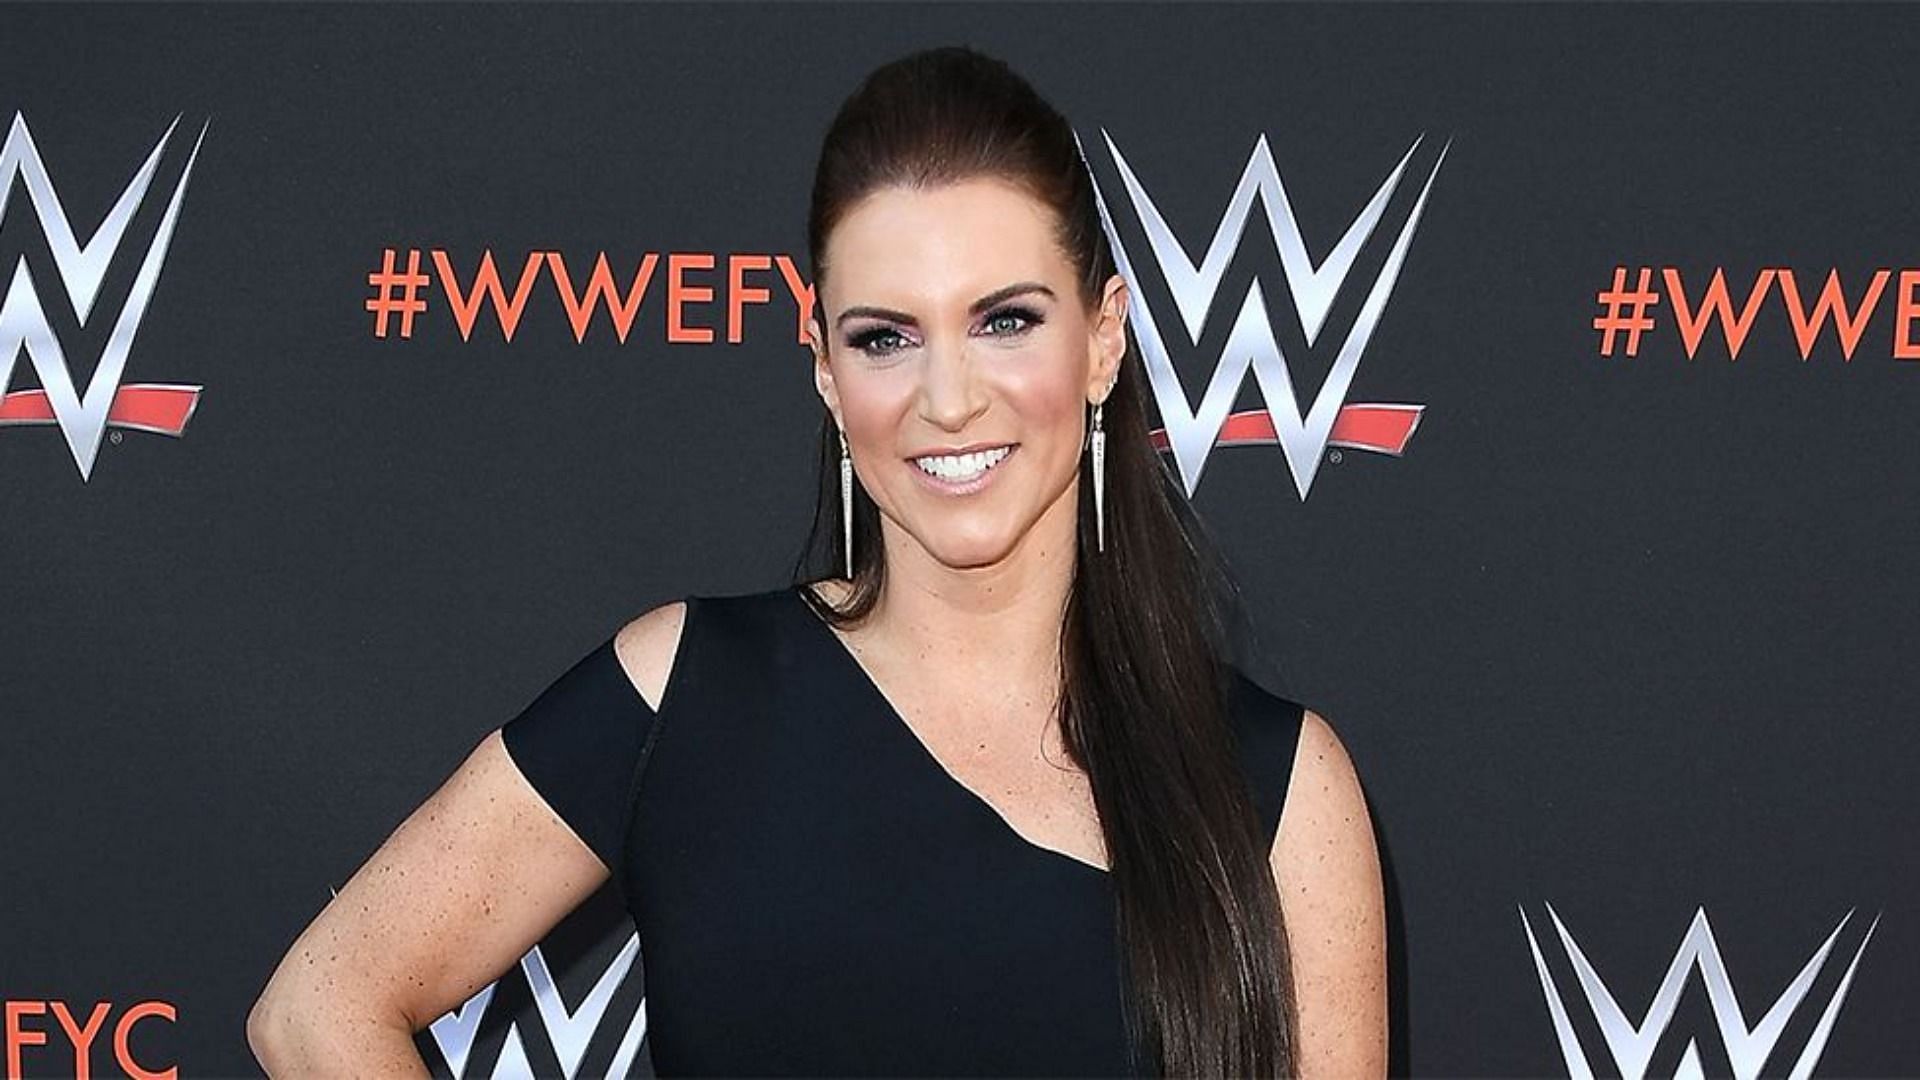 Ww Wwe Stephanie Mcmahon Sex Videos - Stephanie McMahon resigns: Did the former WWE co-CEO undergo surgery after  exit?